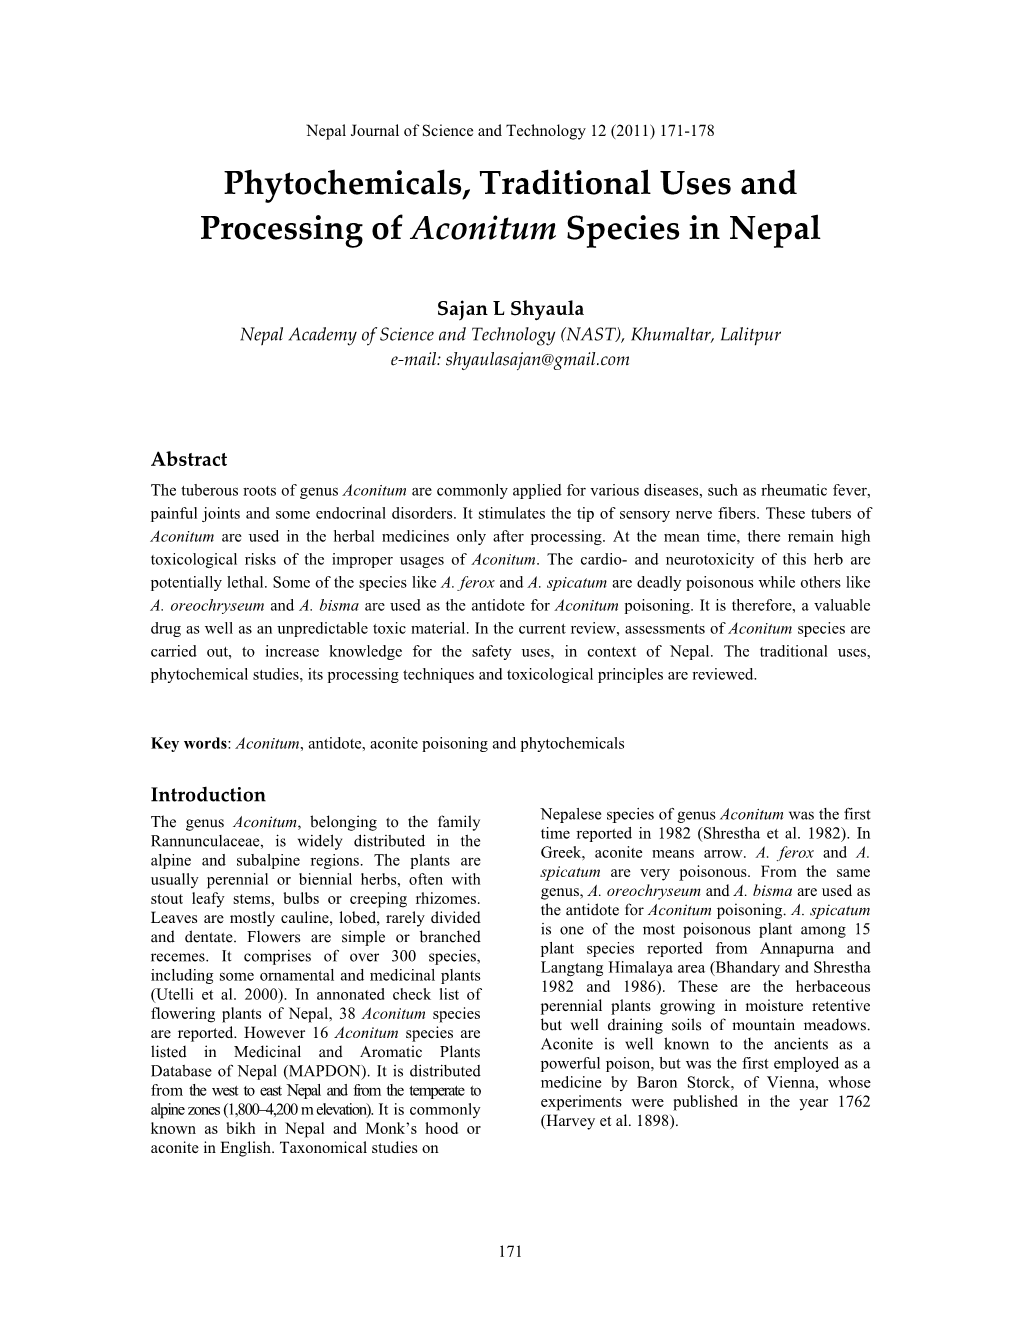 Phytochemicals, Traditional Uses and Processing of Aconitum Species in Nepal